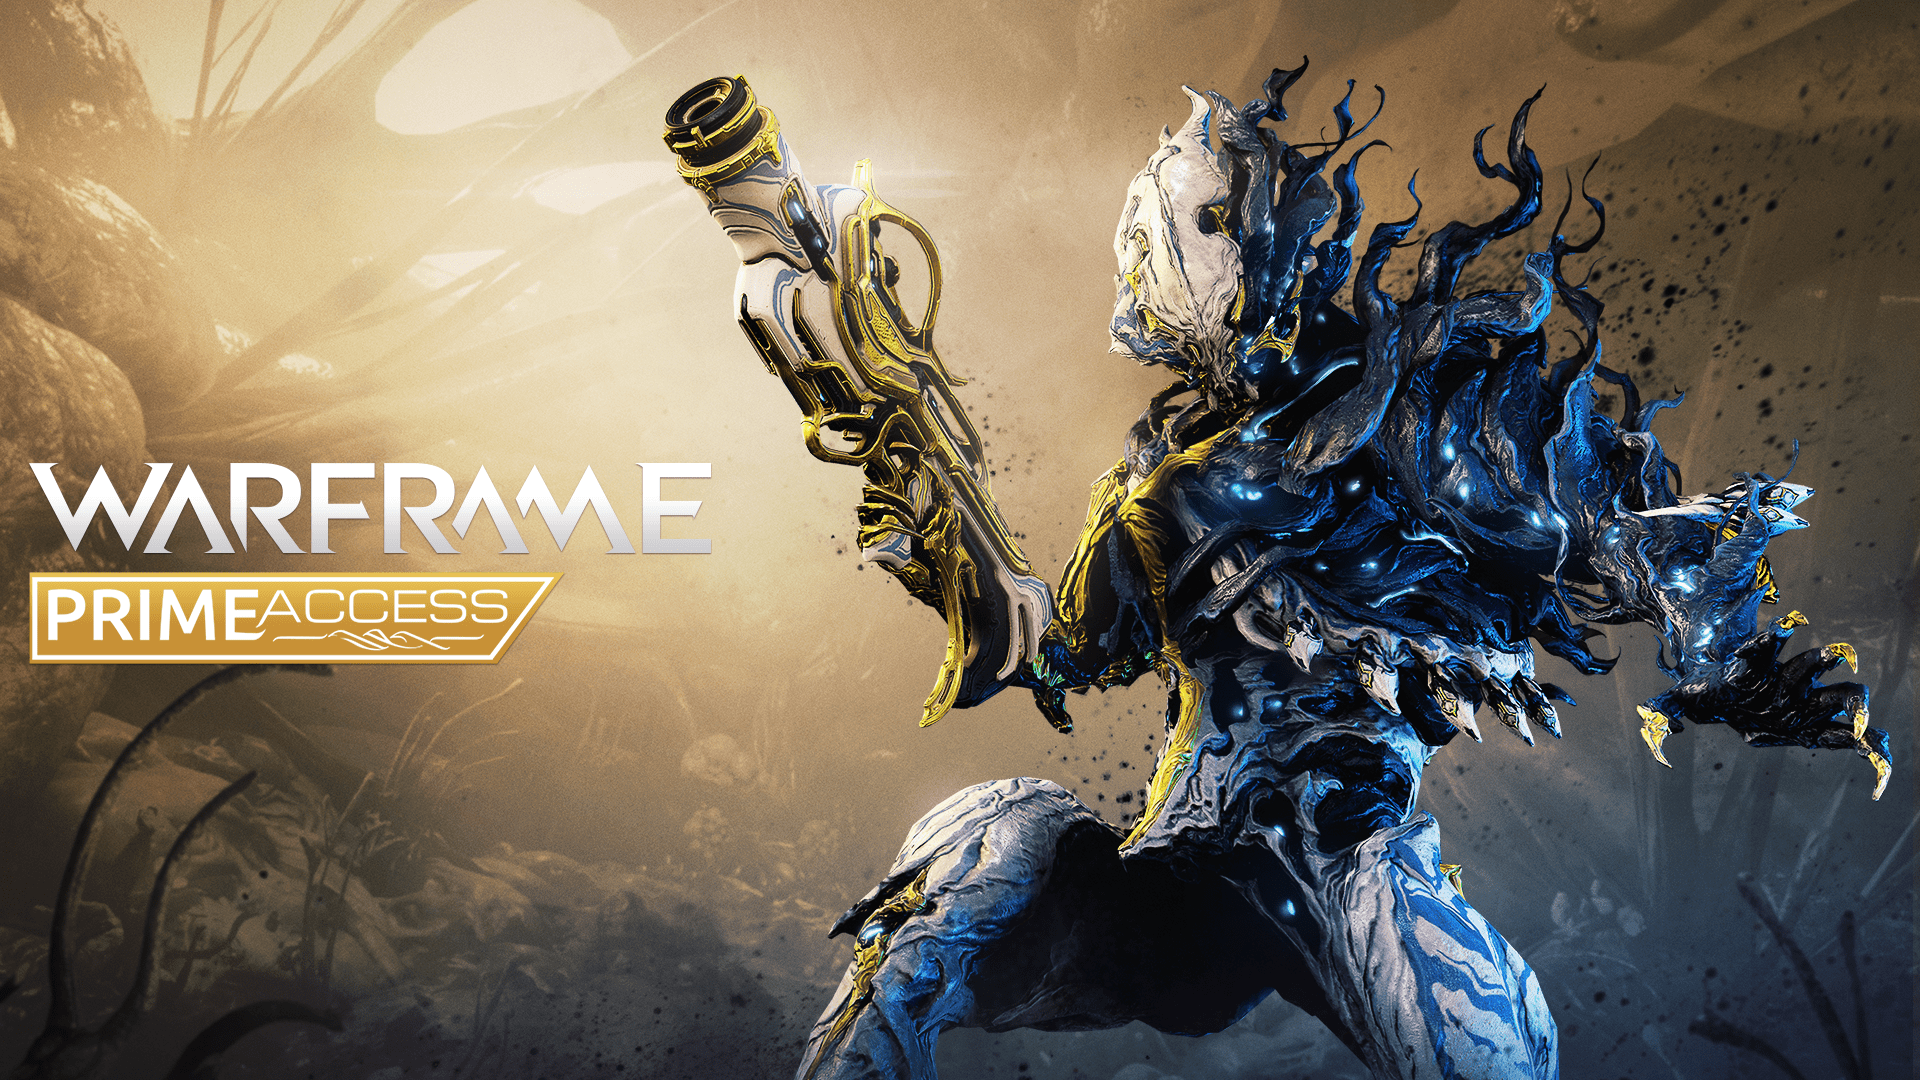 Newest Codes for Free Stuff in Warframe - Lords of Gaming